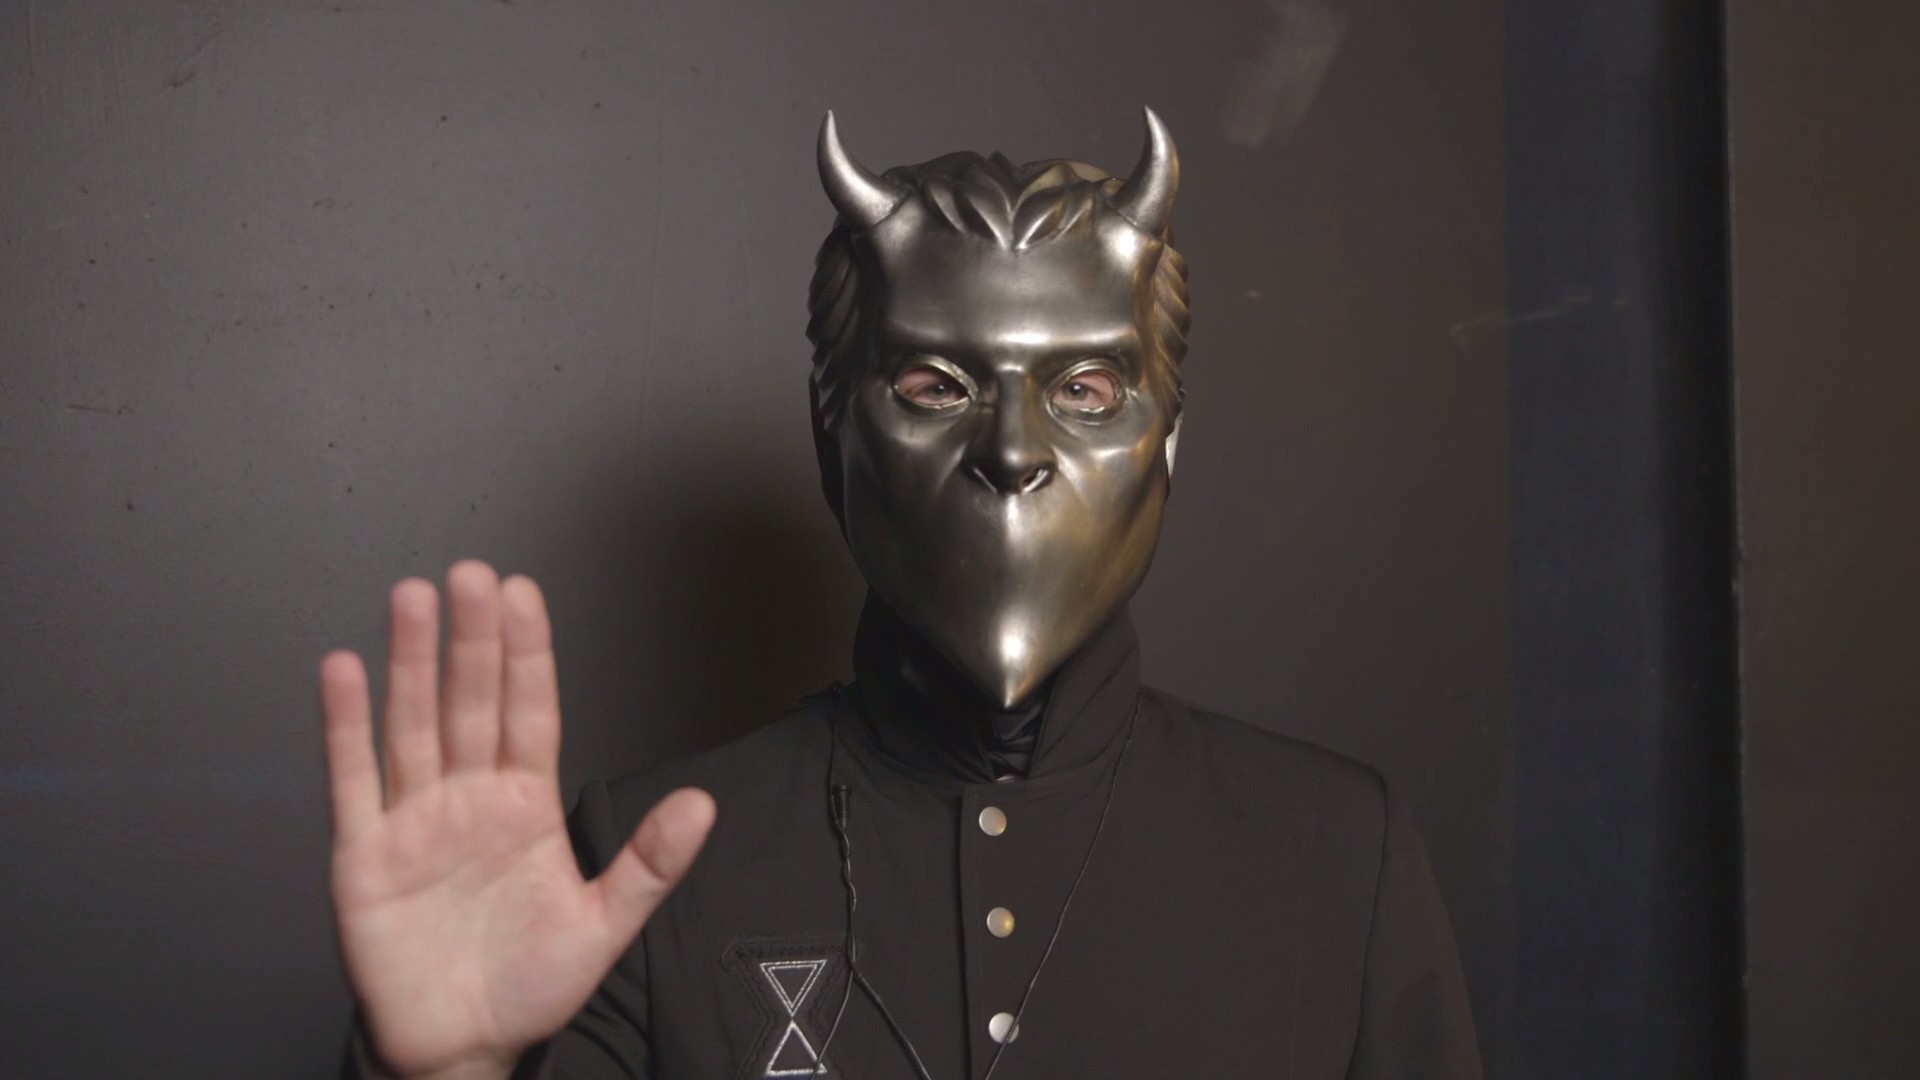 1920x1080 Loudwire: Ghost Talks 'Meliora' And How A Friend's Suicide Inspired 'He Is'